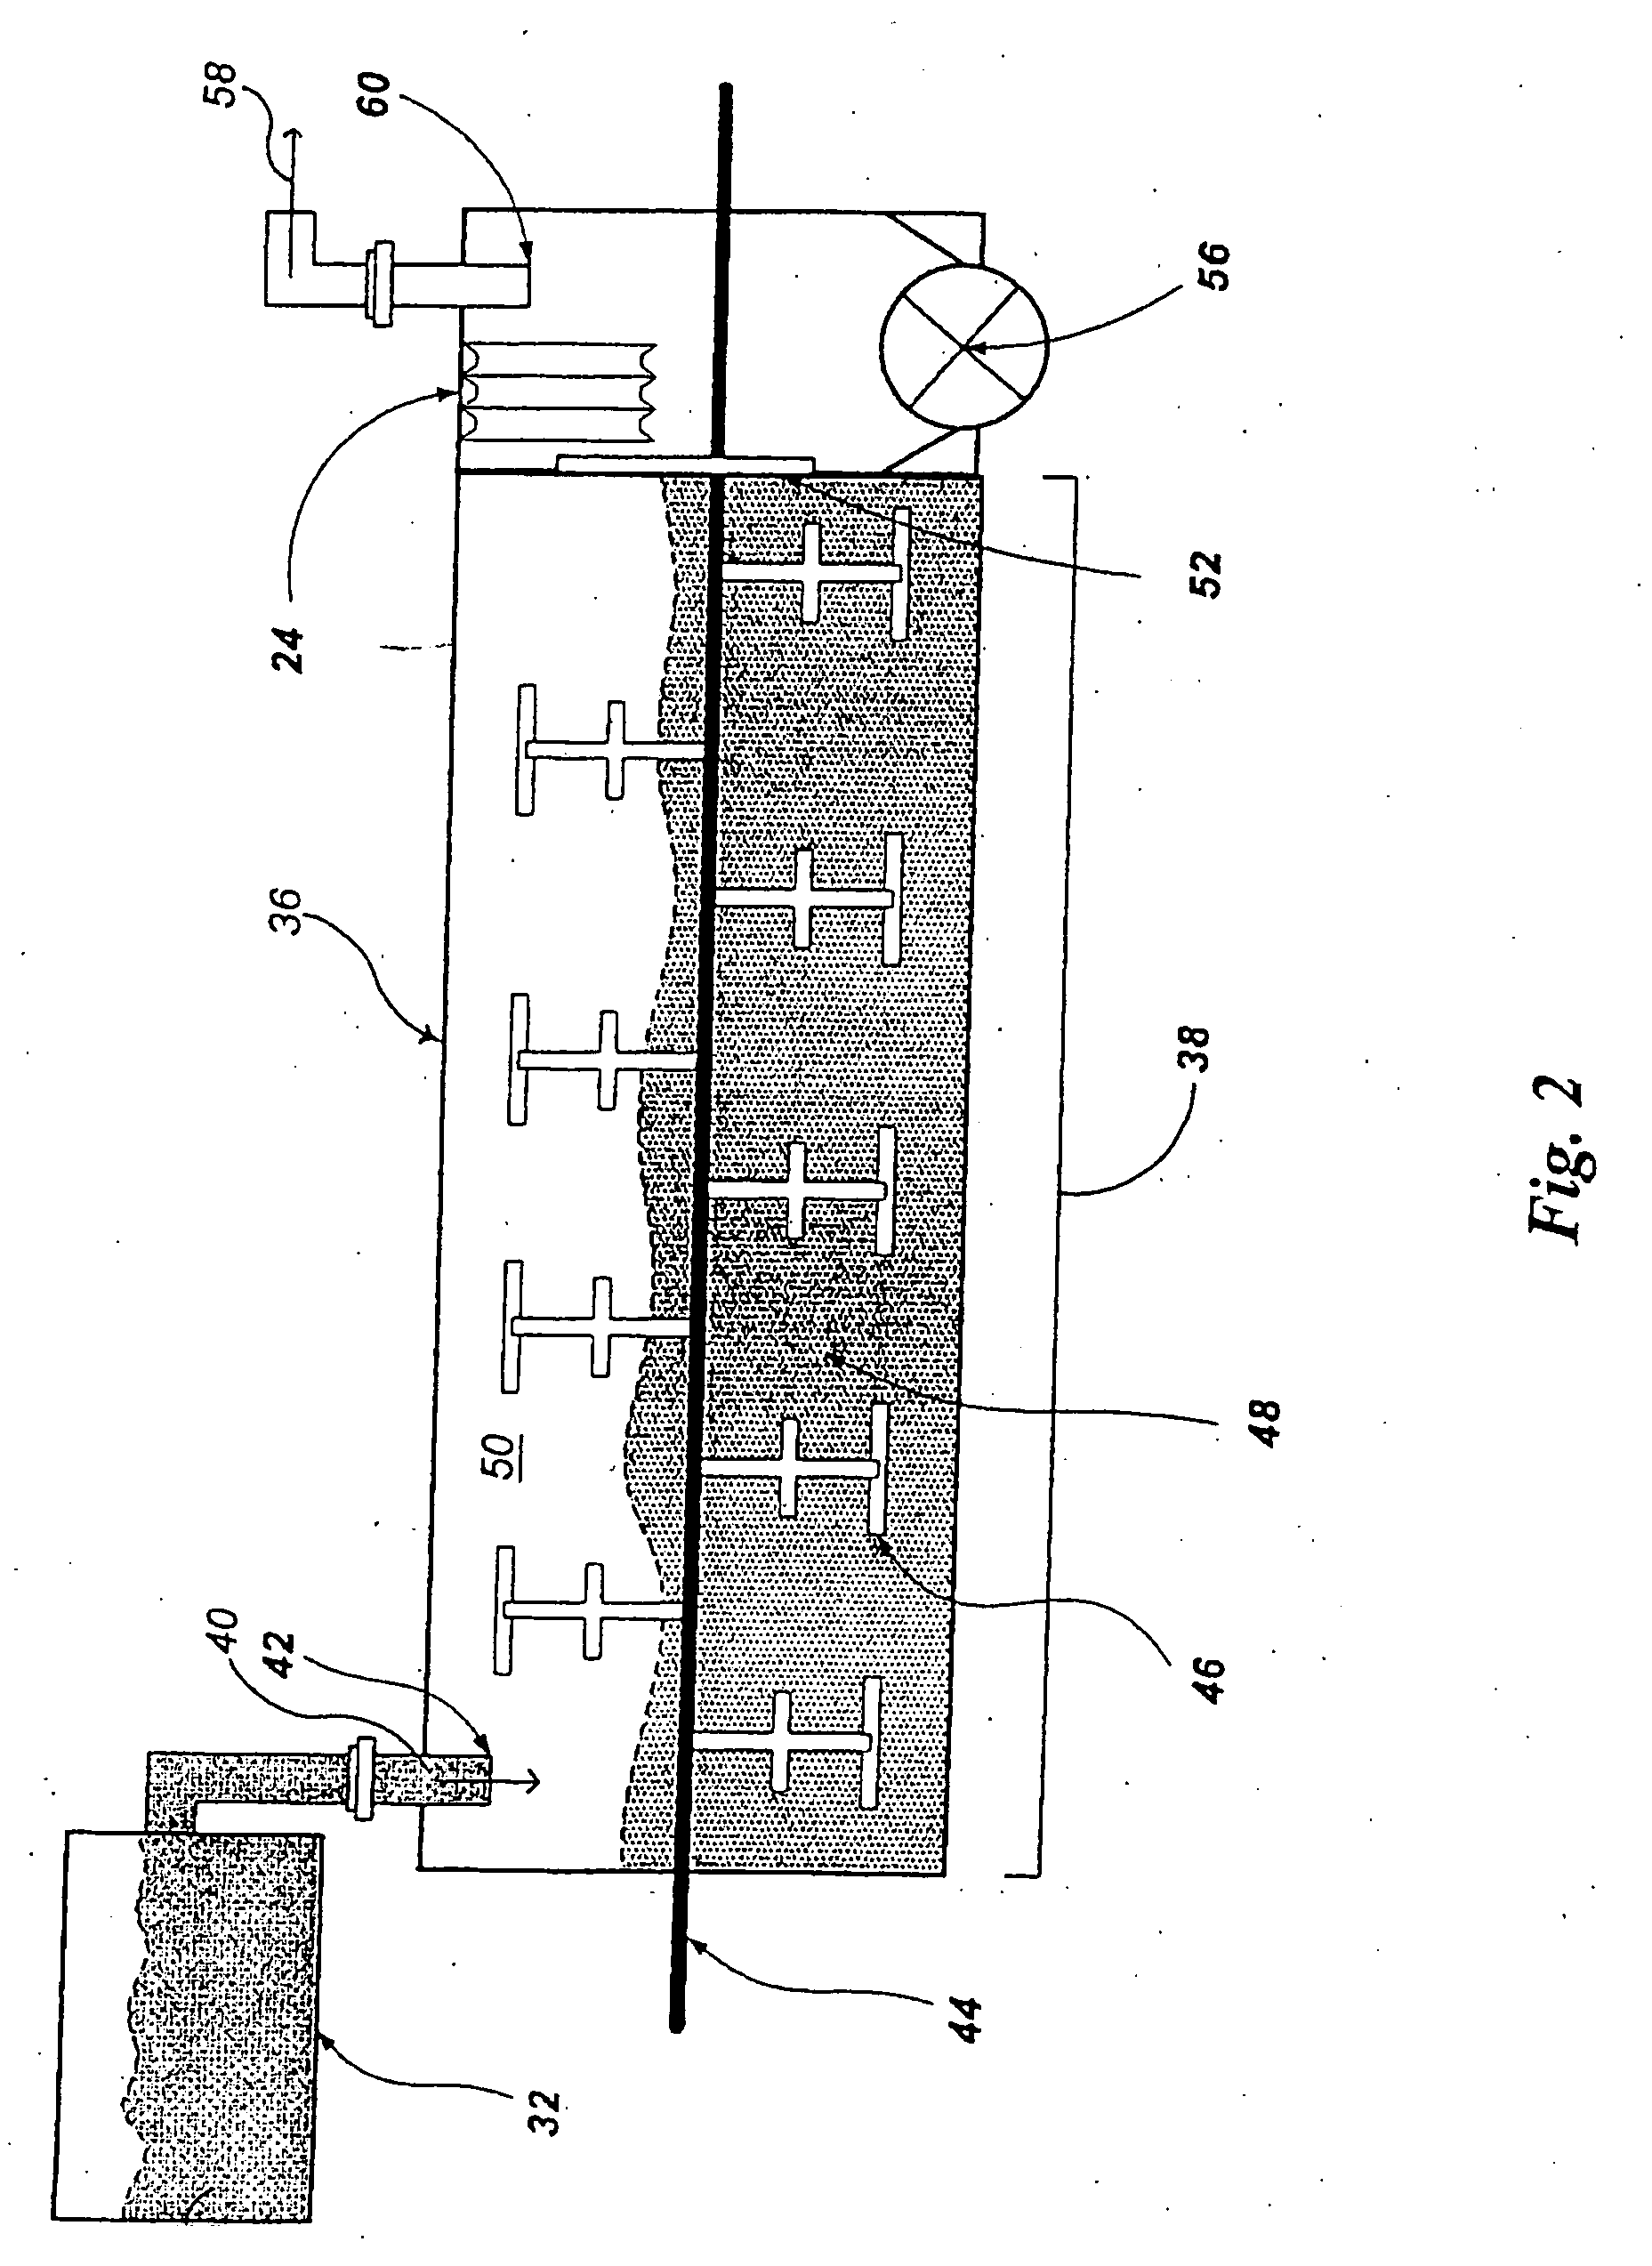 System and Methods for Organic Material Conversion and Energy Generation